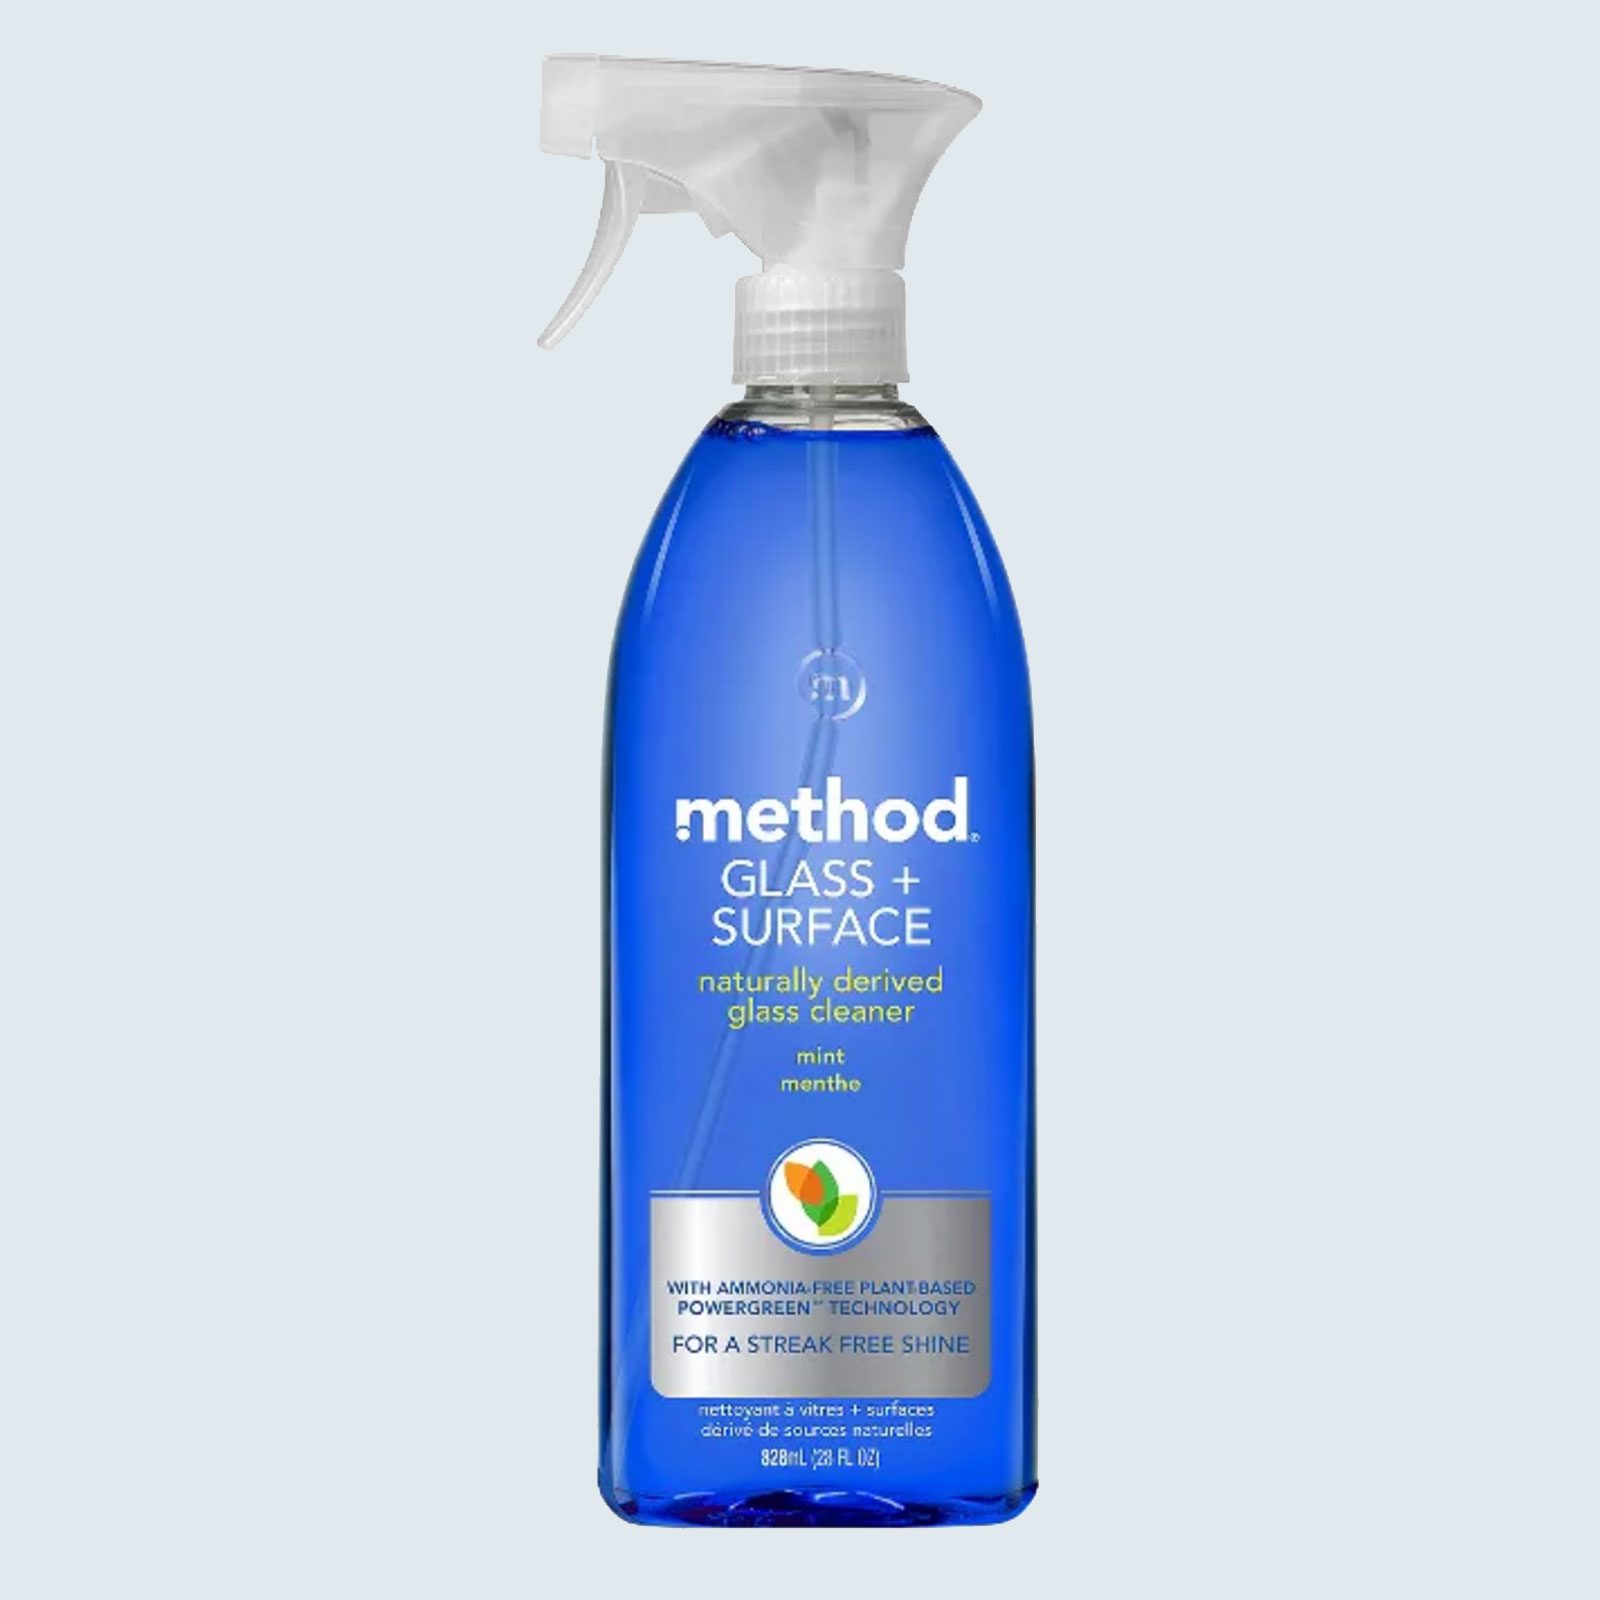 Method Glass + Surface Cleaner